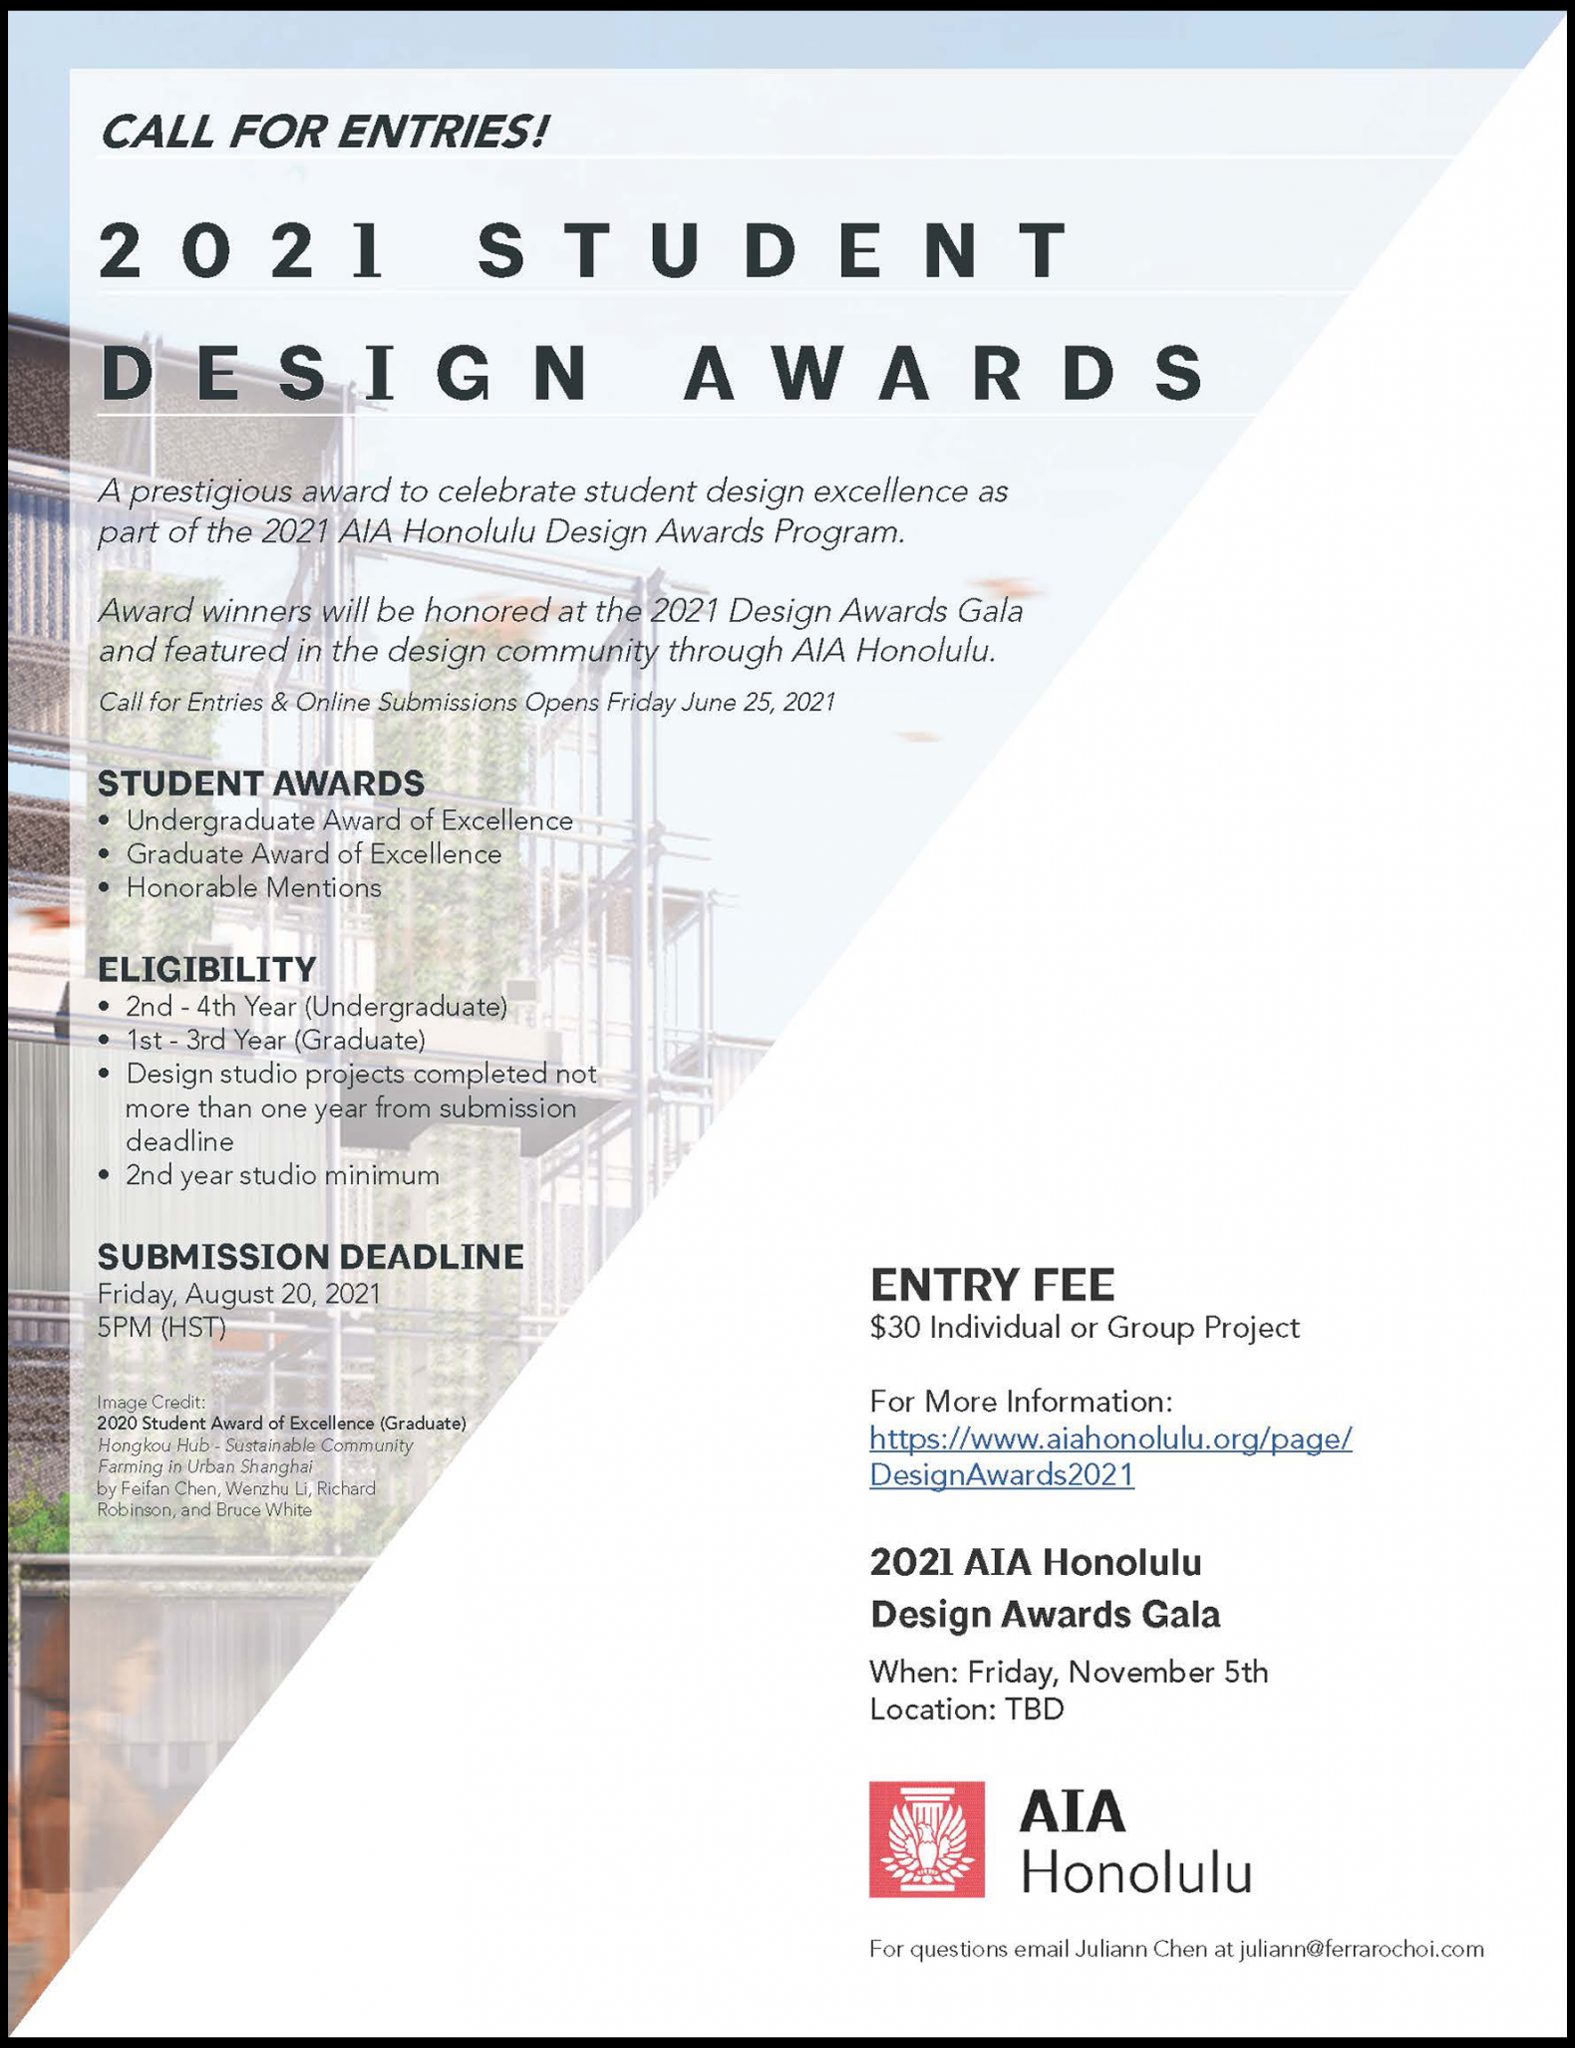 CALL FOR ENTRIES: 2021 AIA Honolulu Student Design Competition